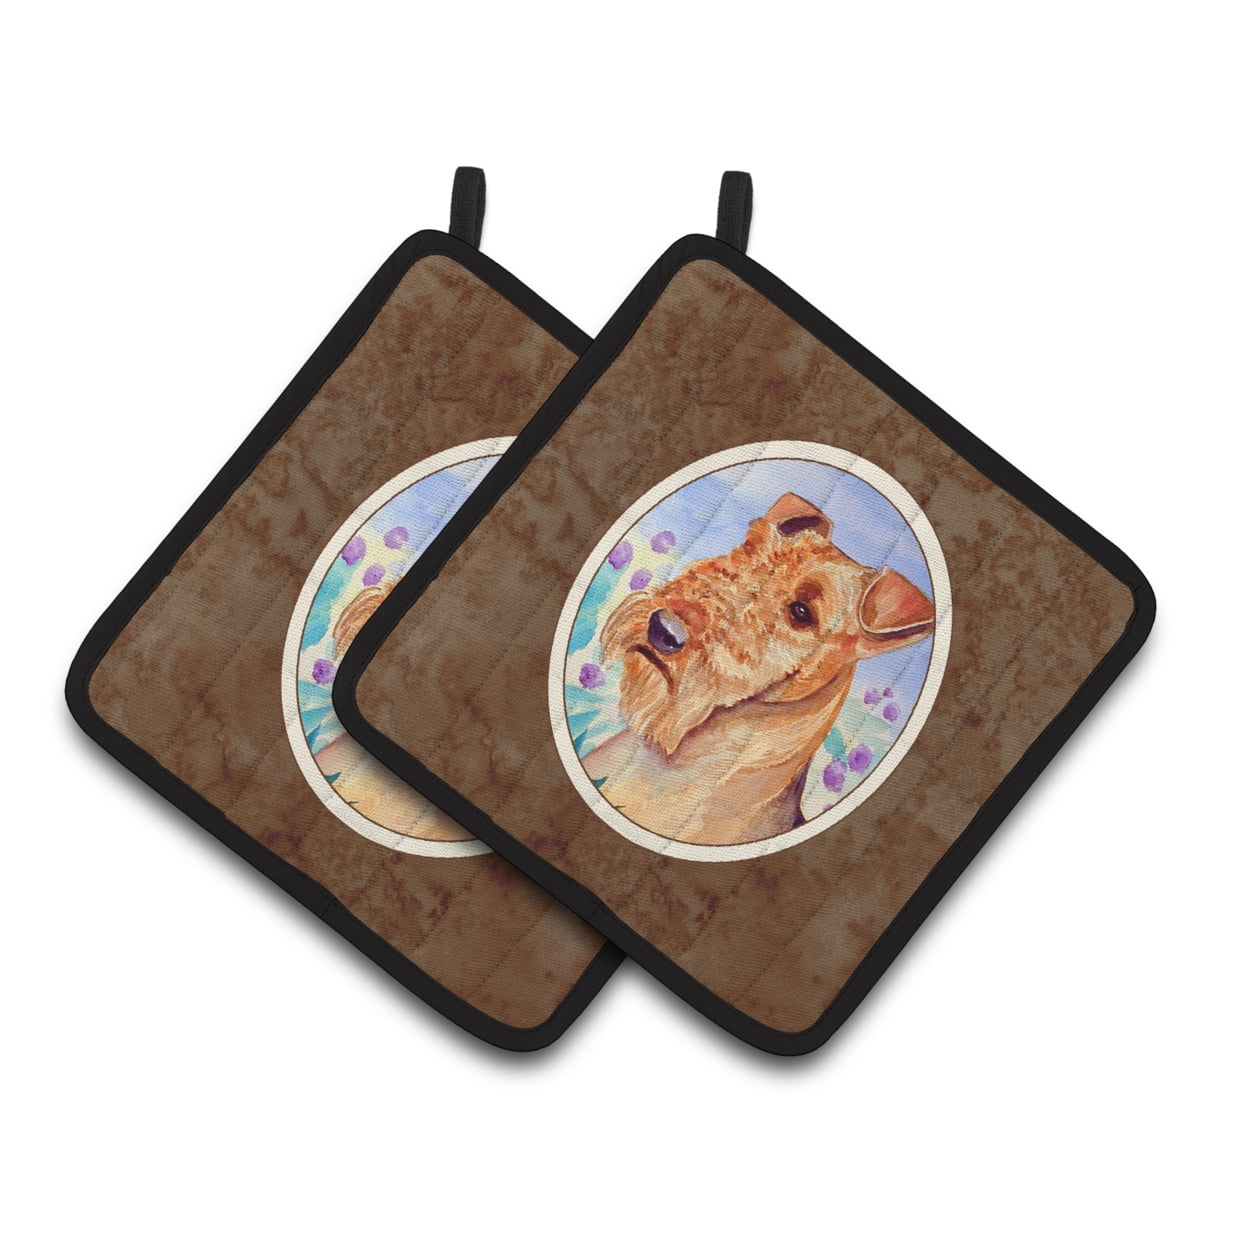 Picture of Carolines Treasures 7007PTHD Airedale Terrier in Flowers Pair of Pot Holders